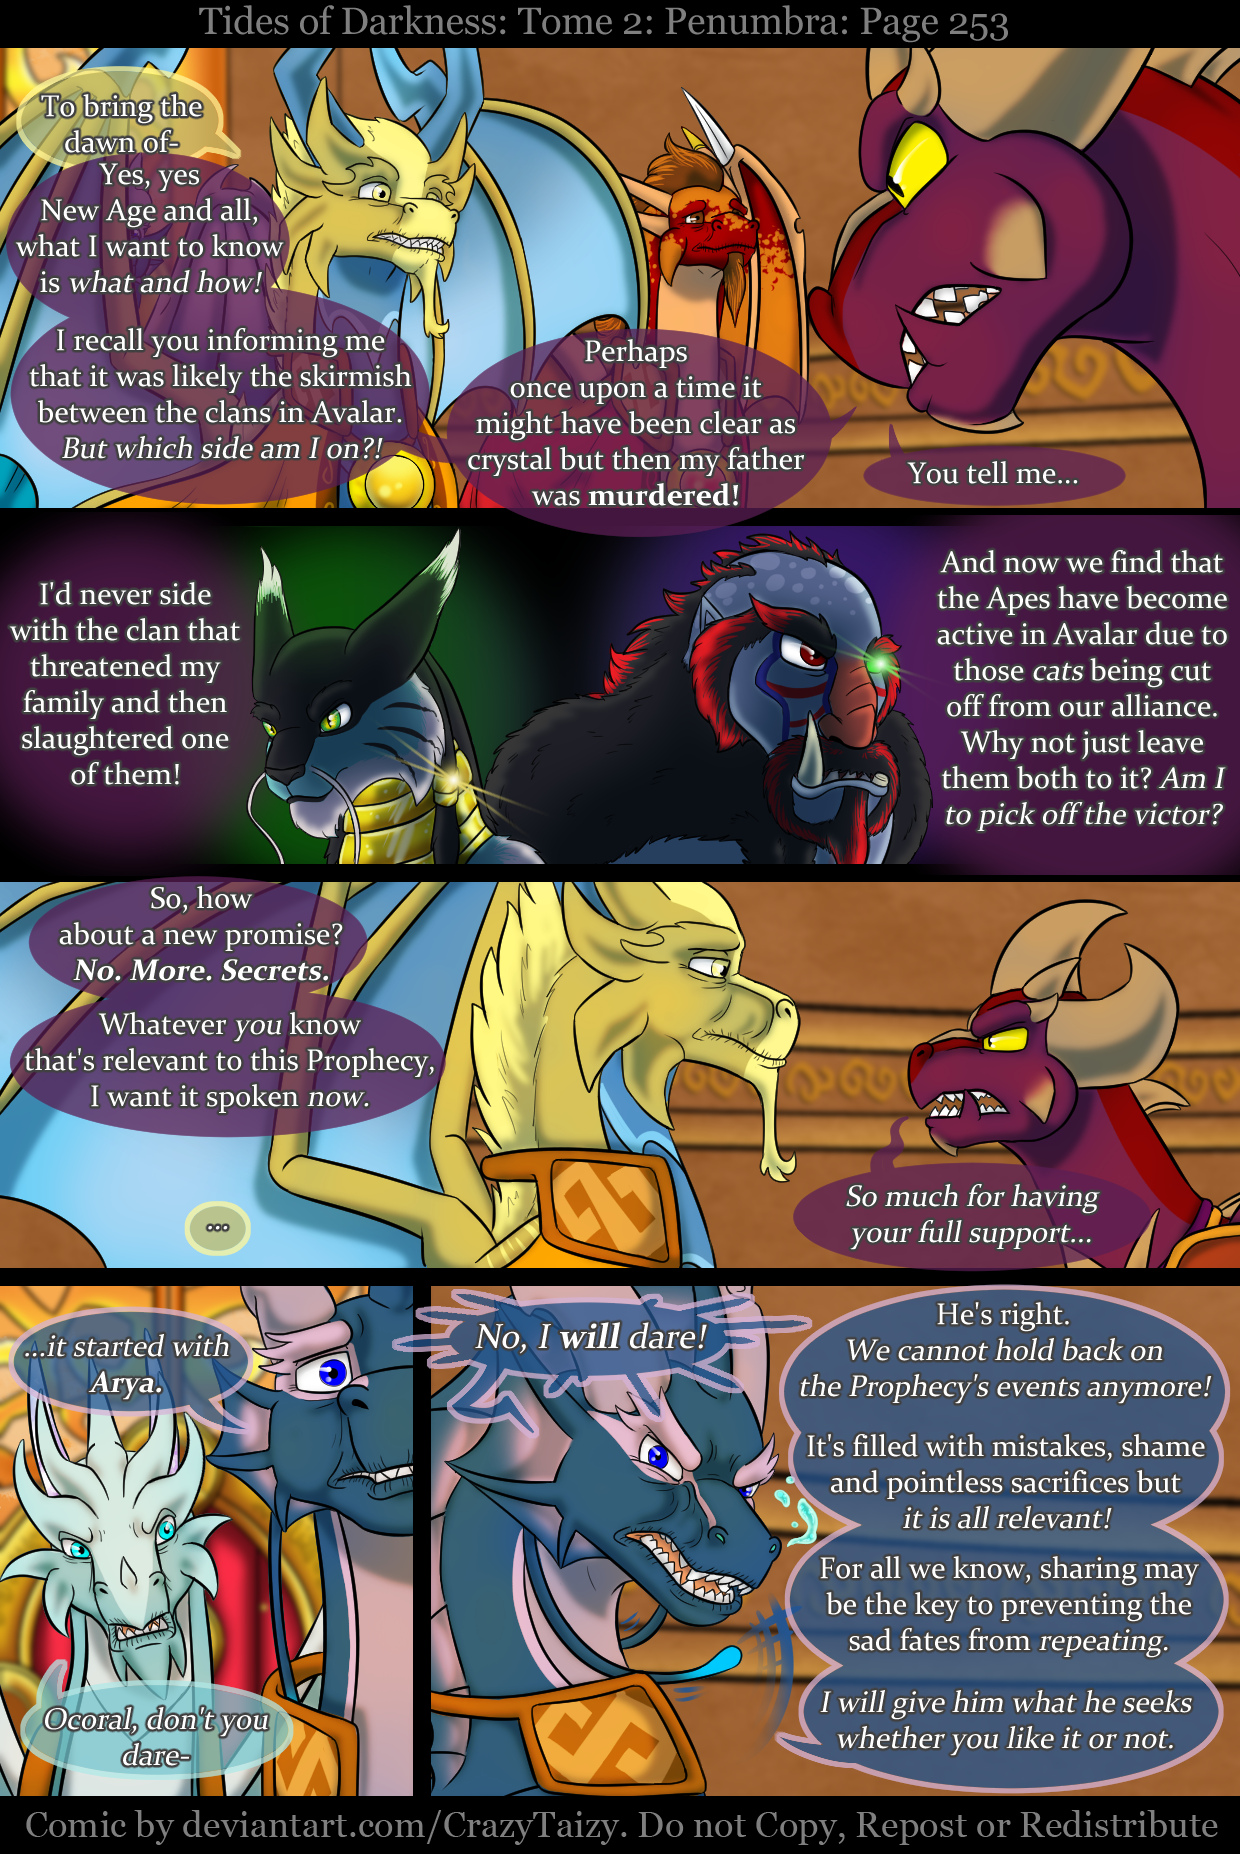 Tides of Darkness: Penumbra Page 253